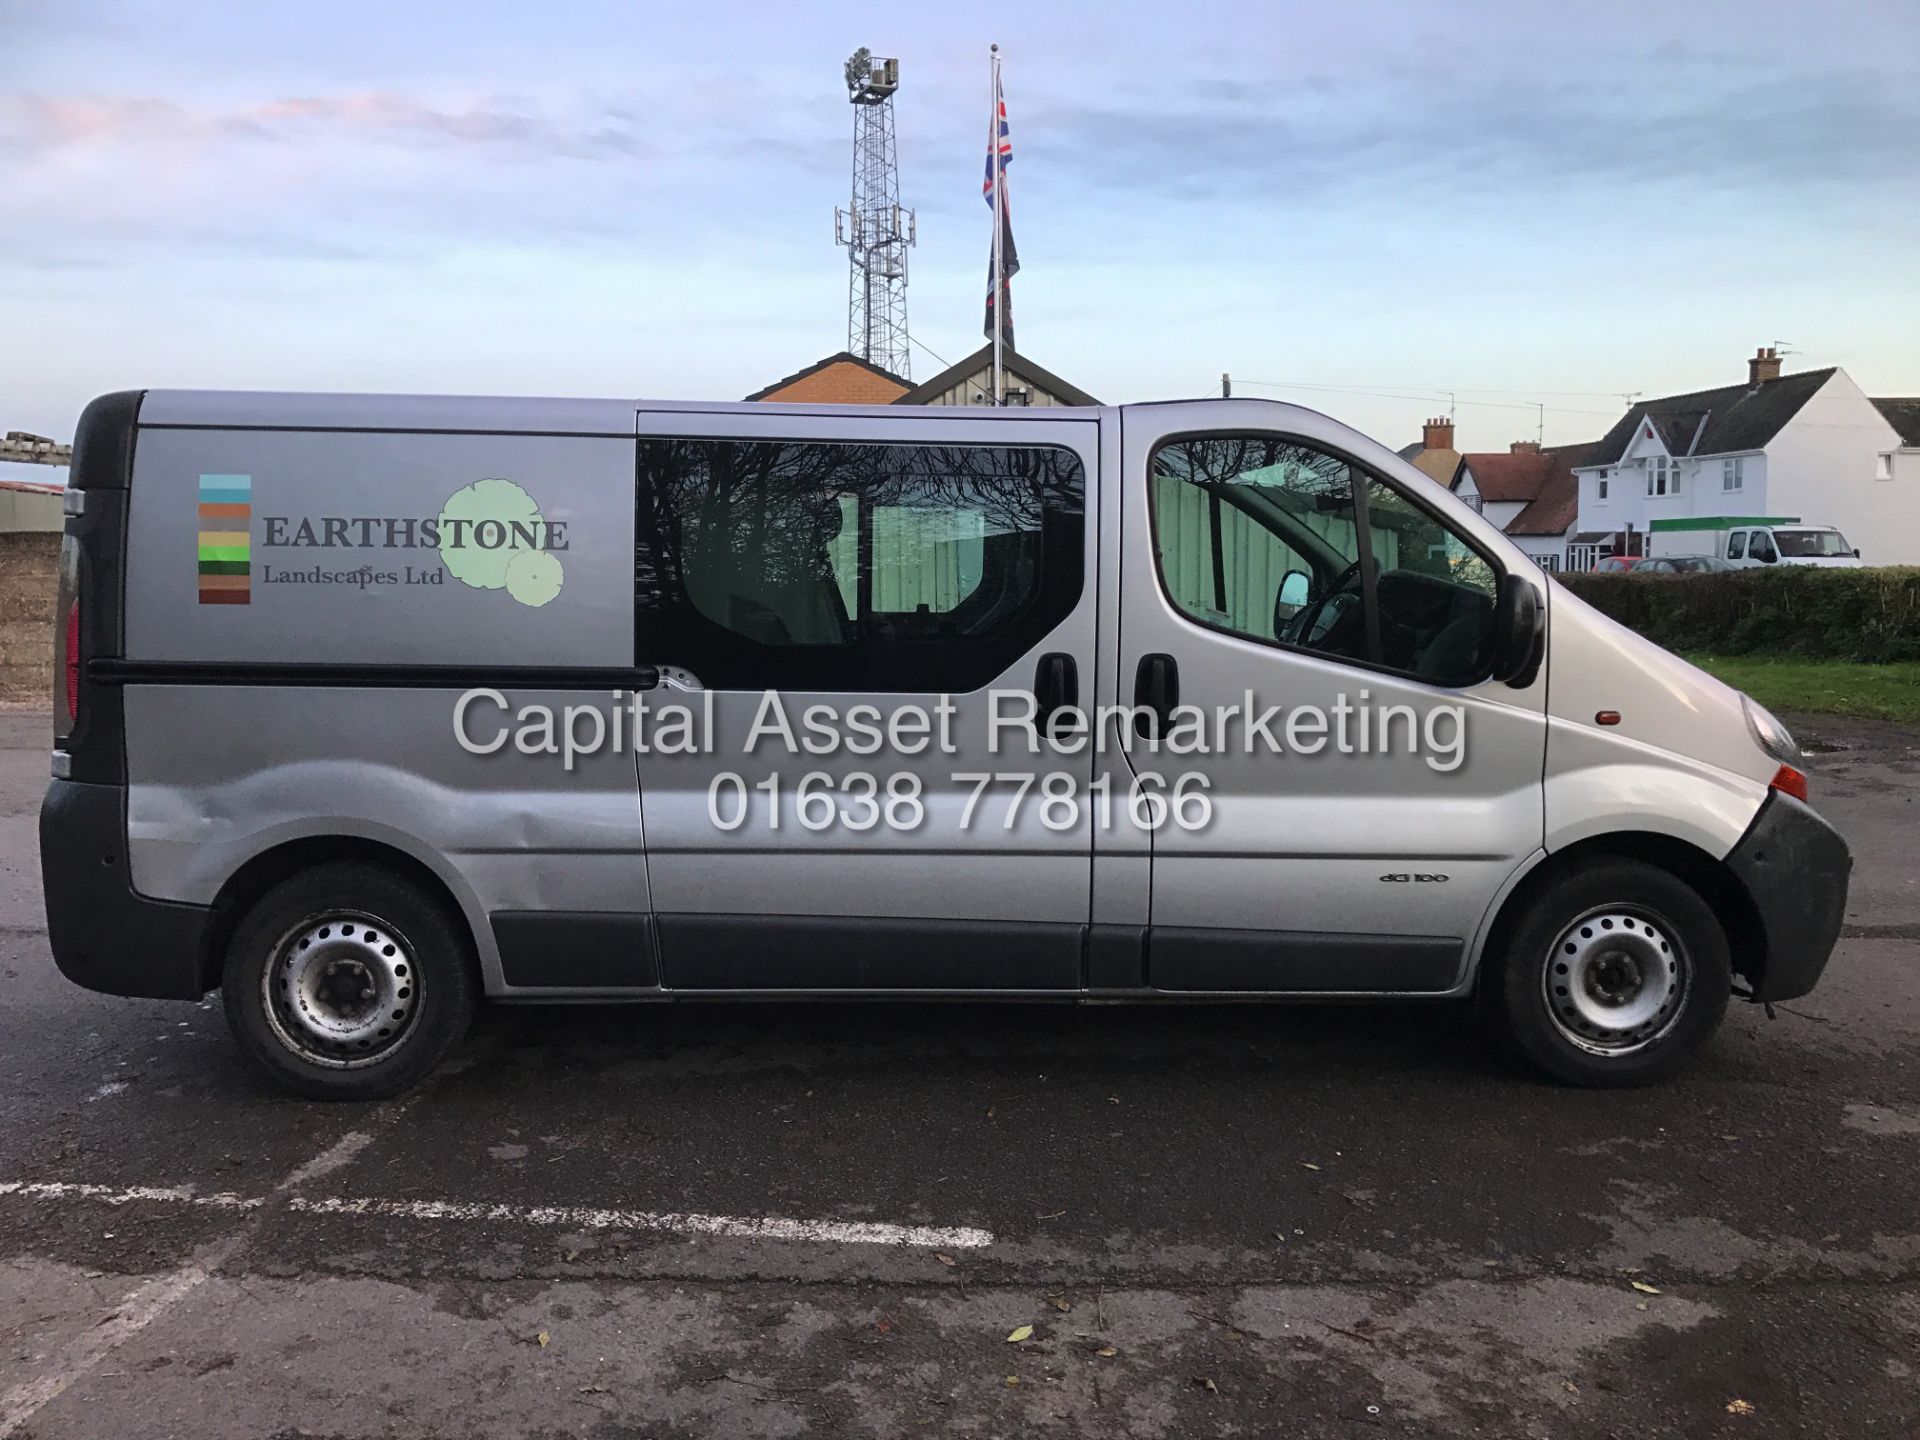 On Sale RENAULT TRAFIC 1.9DCI LONG WHEEL BASE DUELINER 6 SEATER - 05 REG - SILVER - AIR CON - WOW!!! - Image 5 of 19